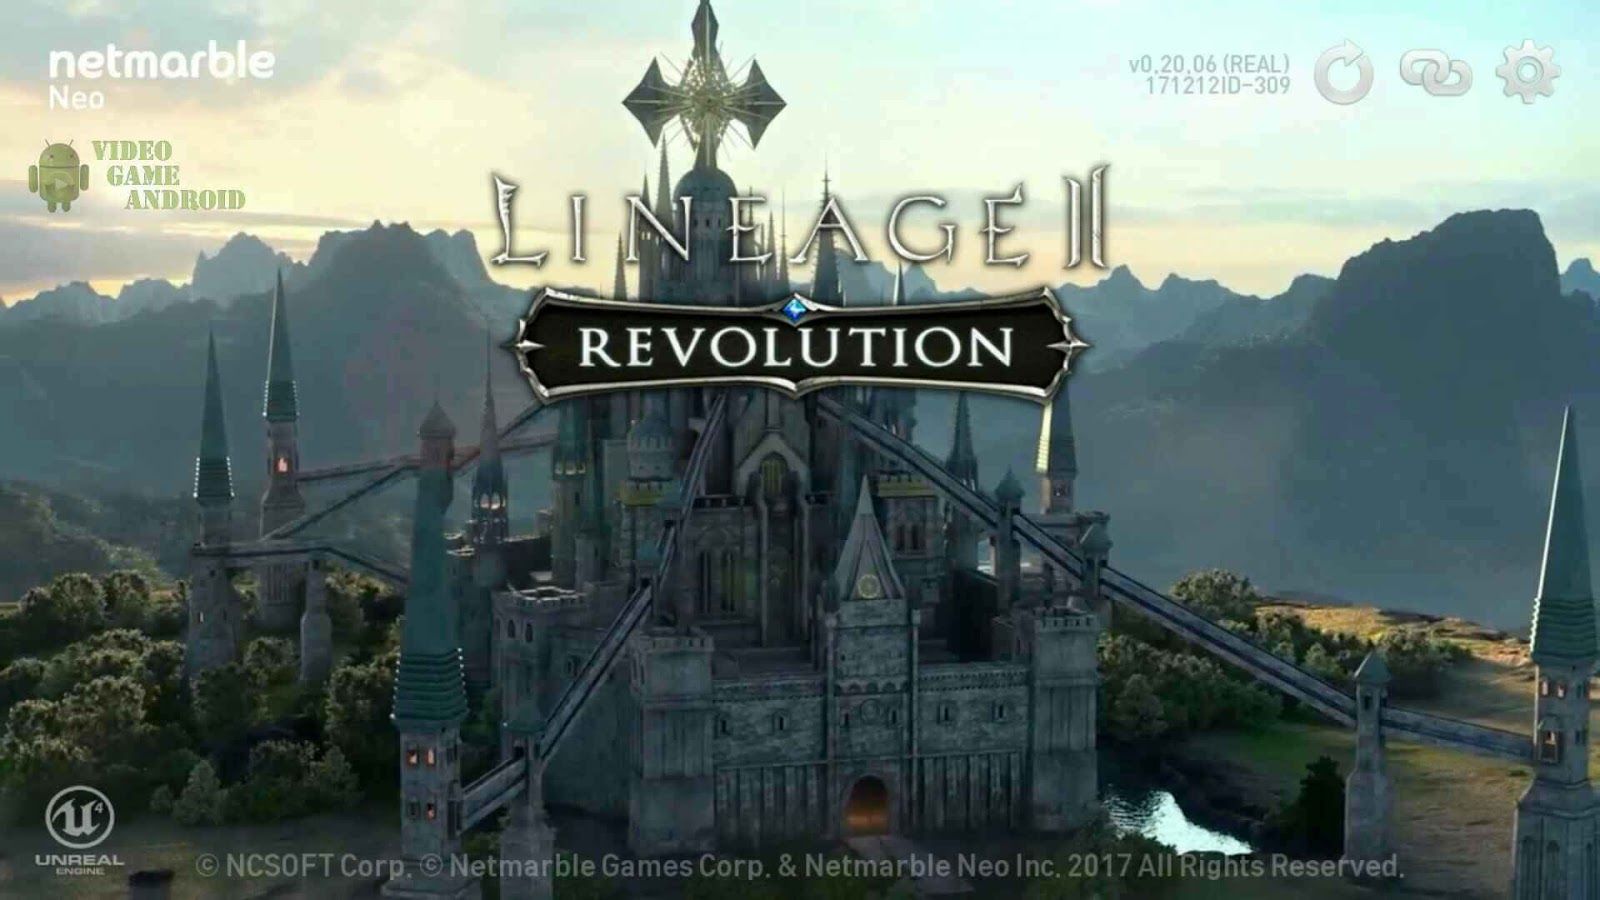 Netmarble launcher pc. Lineage 2 Revolution. Netmarble games. Lineage 2 Unreal engine 4. Lineage 2 Revolution Gameplay.